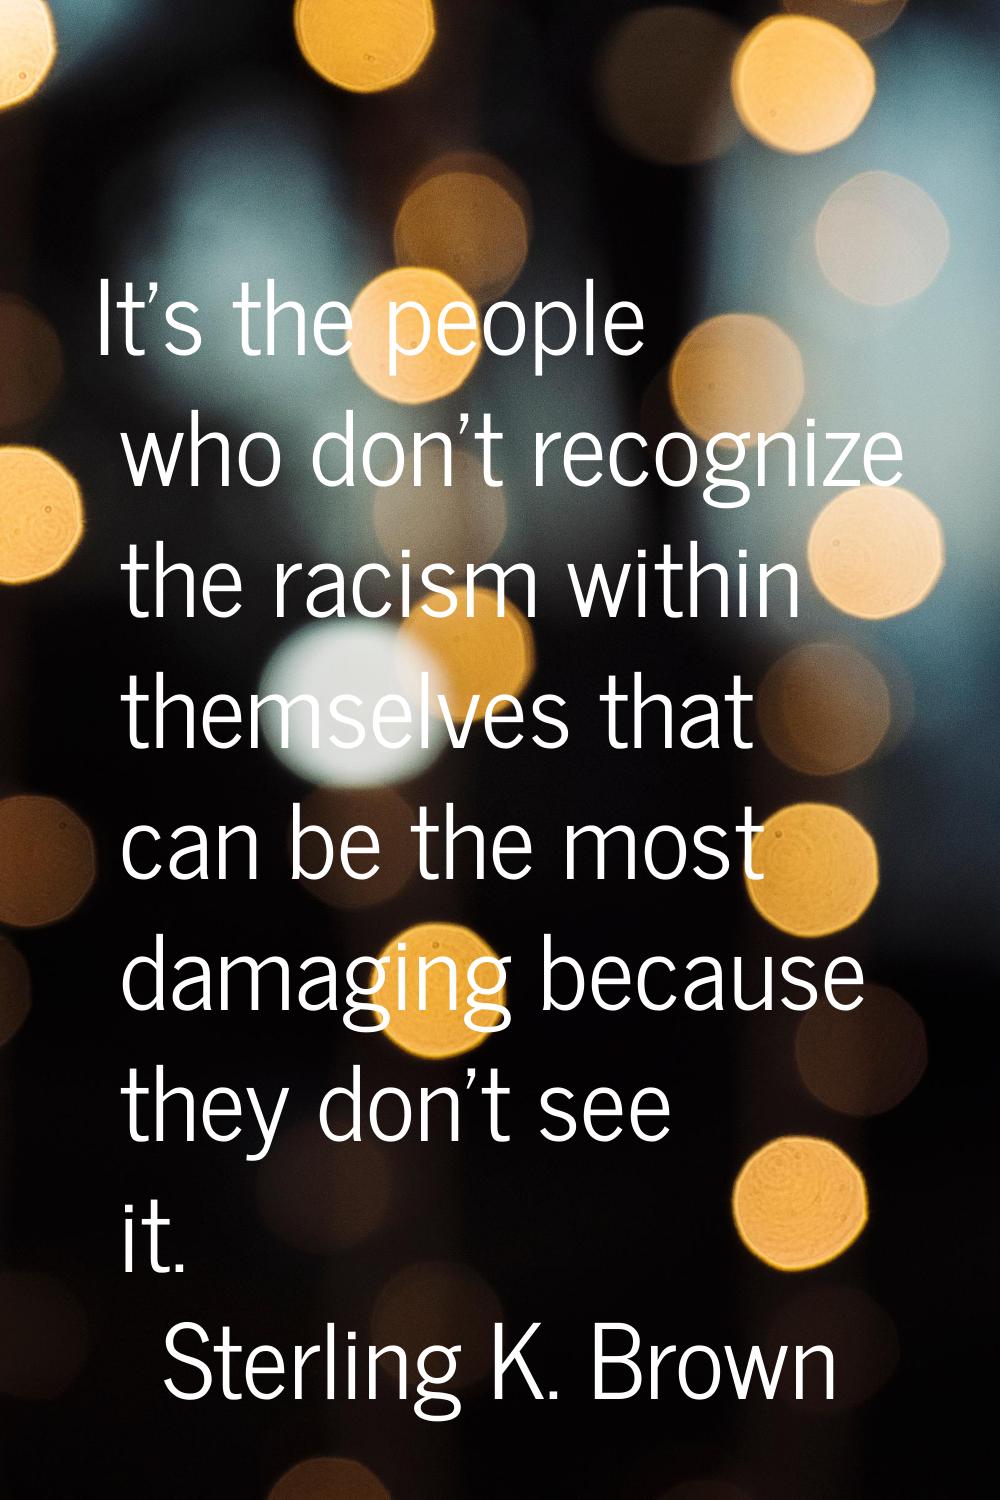 It's the people who don't recognize the racism within themselves that can be the most damaging beca